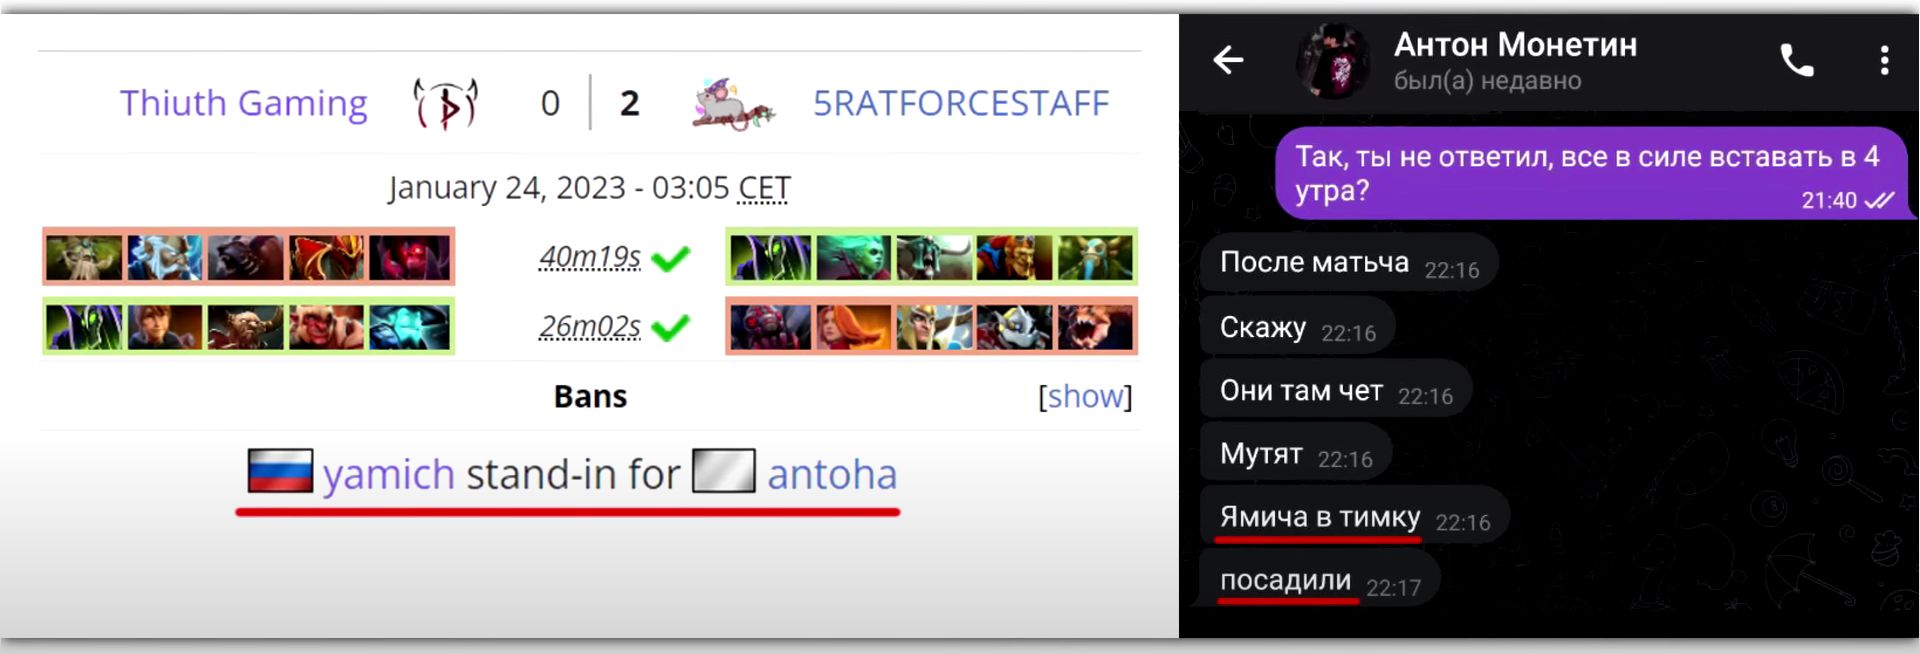 Mute all chat in dota 2 фото 82